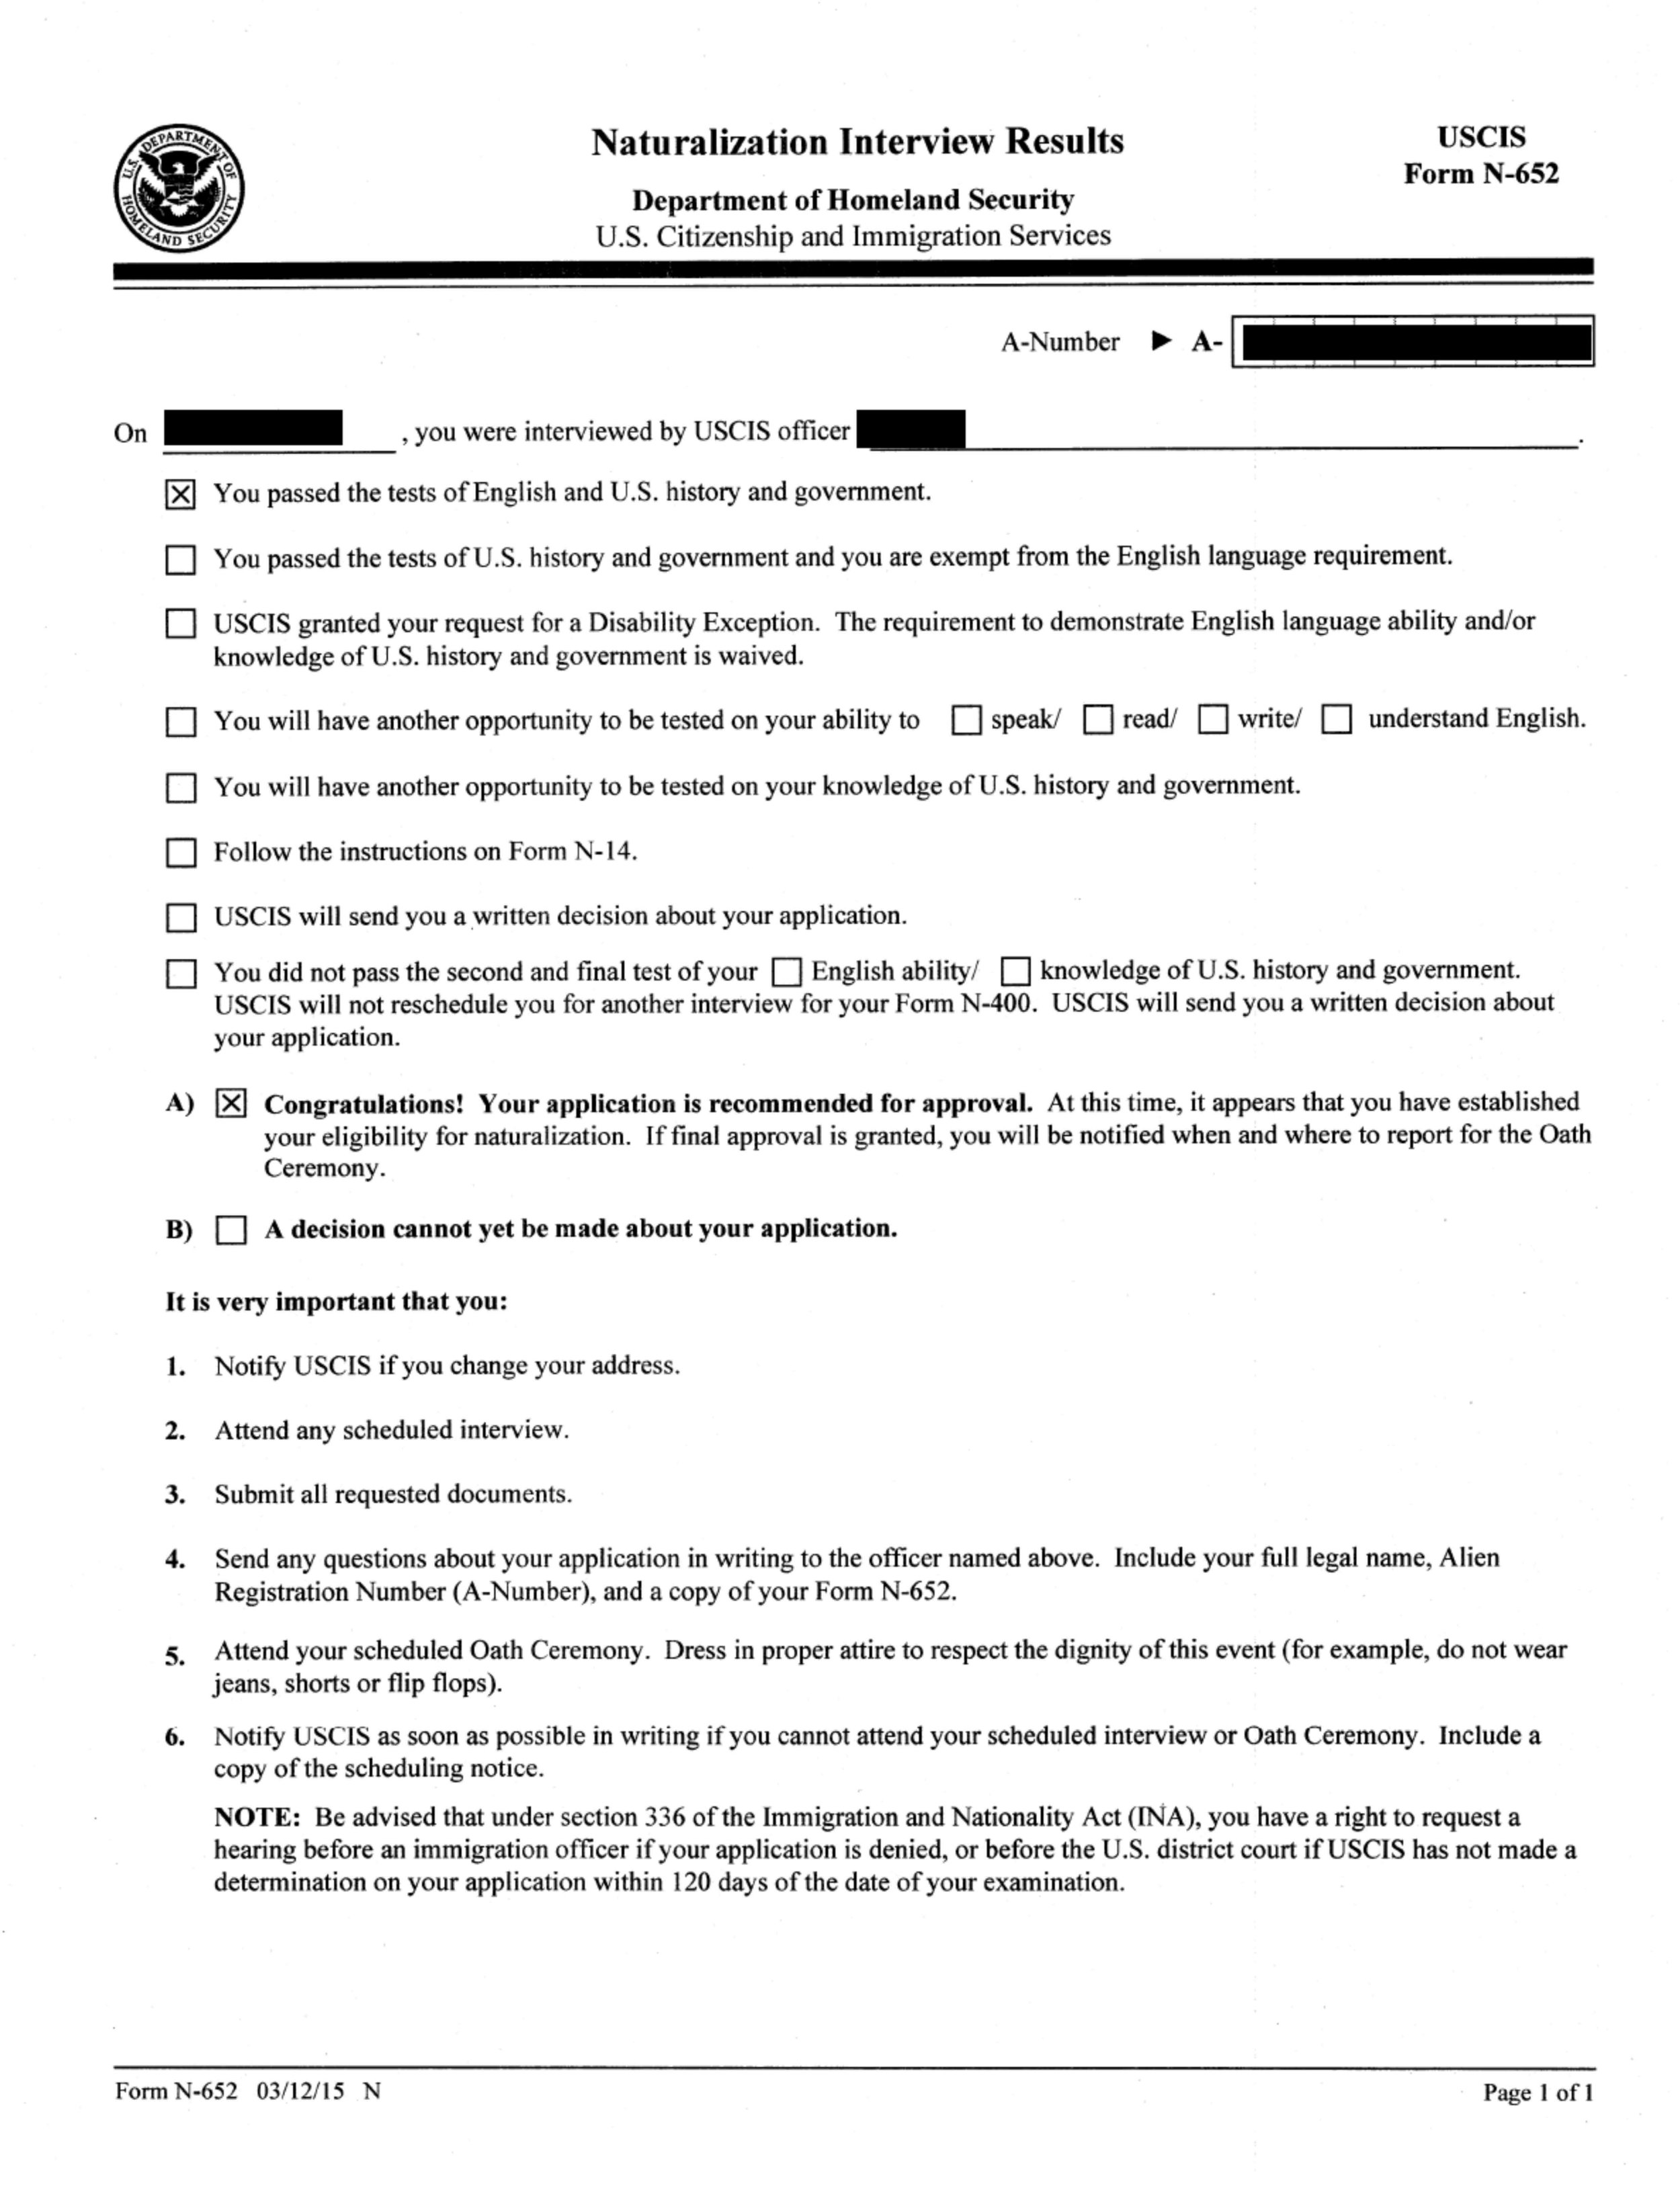 Naturalization (N-400) Interview Approval